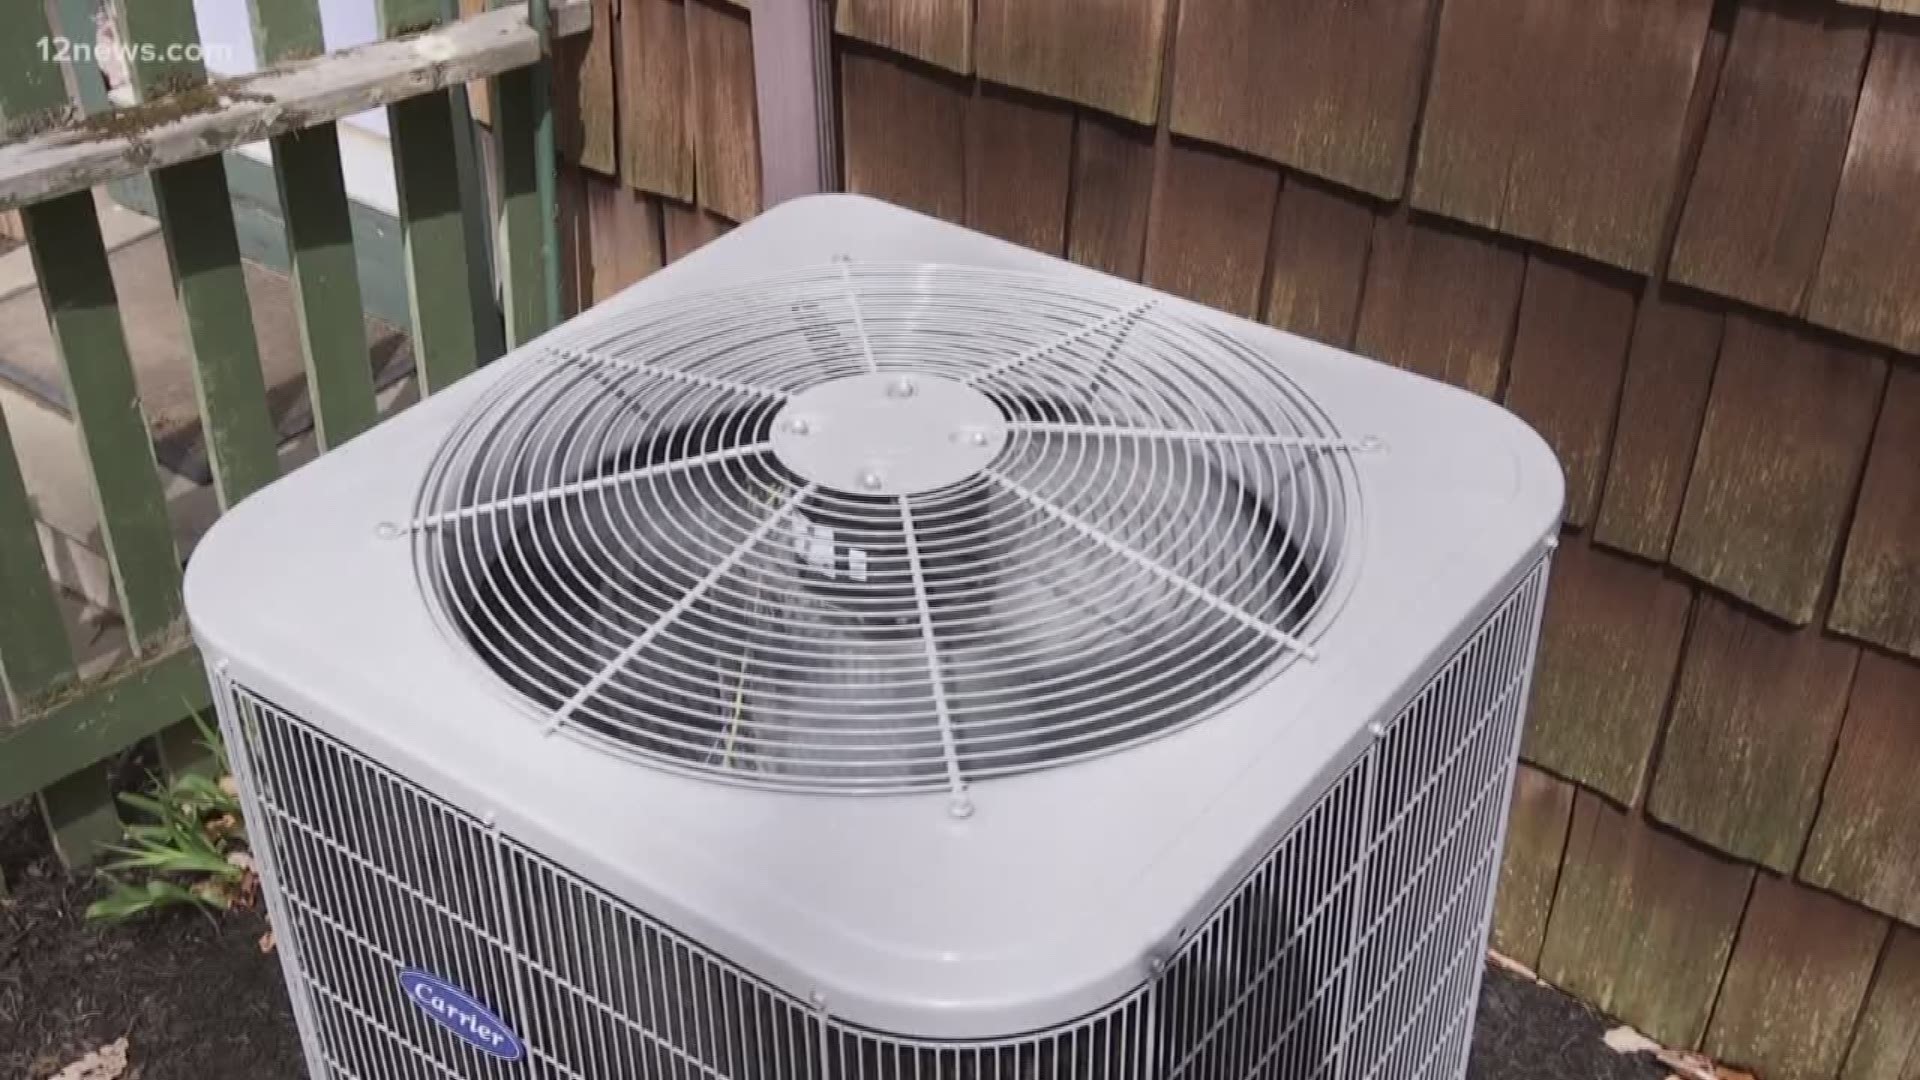 Three tips to make sure that your air conditioner lasts throughout the summer.